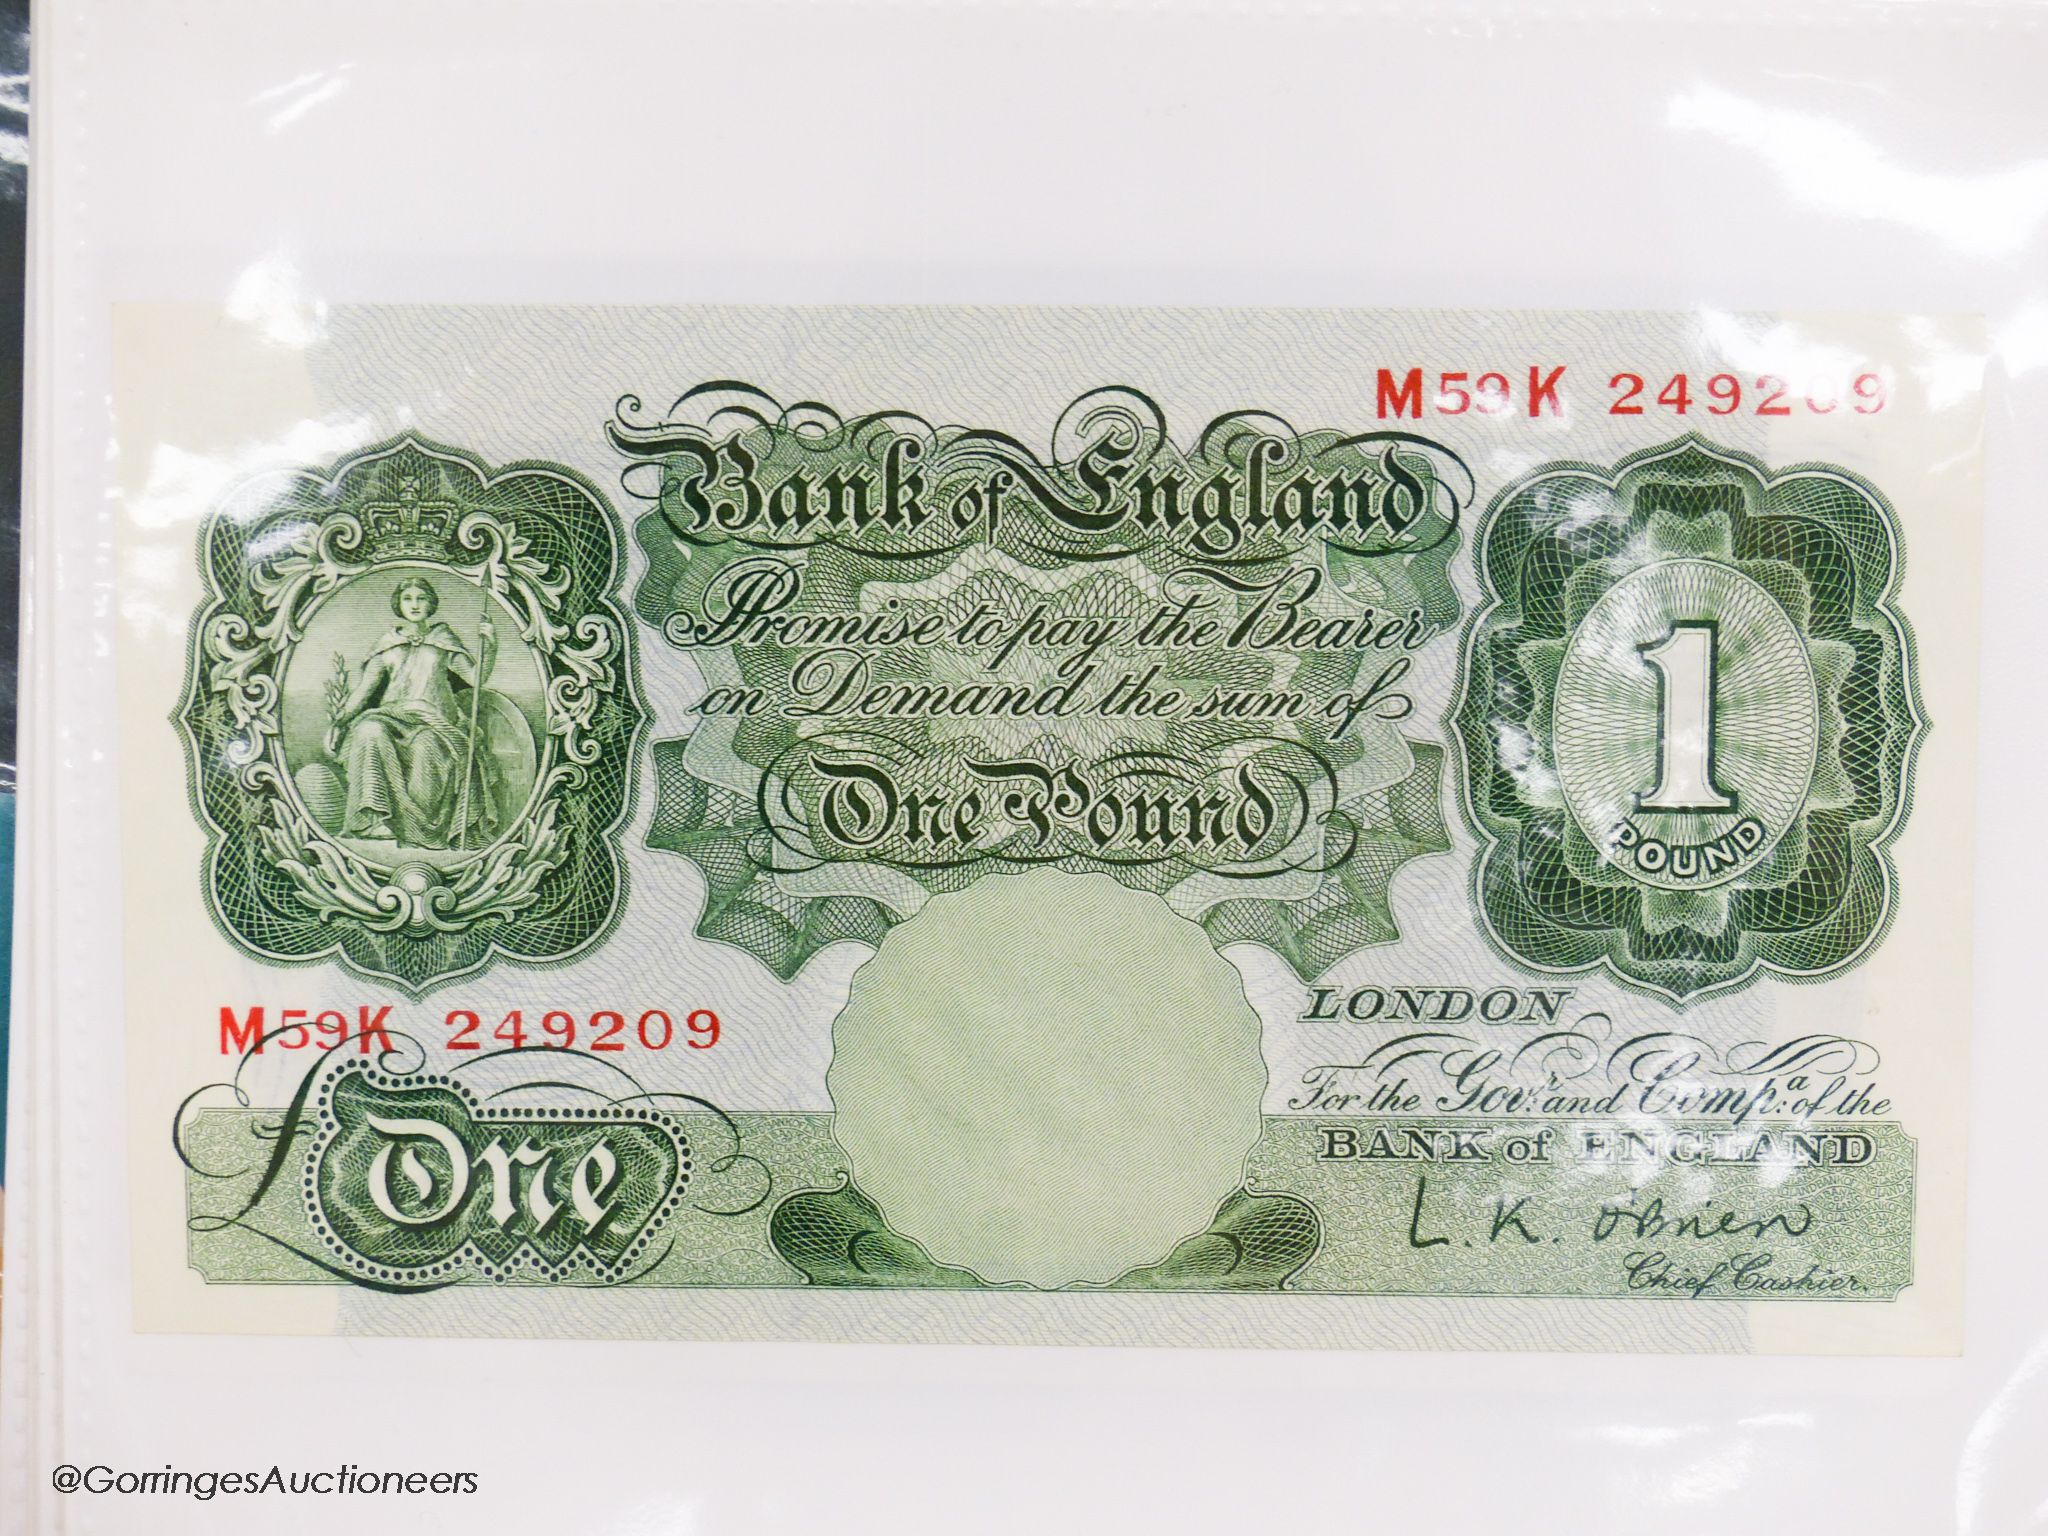 A collection of Bank of England and Scottish banknotes to include: 21 QEII 10 shillings, 14 O'Brien and Beale 10 shillings, 1 Peppiatt 10 shillings, 4 Hallam one pound notes, 18 O'Brien or Beale one pound notes, 8 Peppia